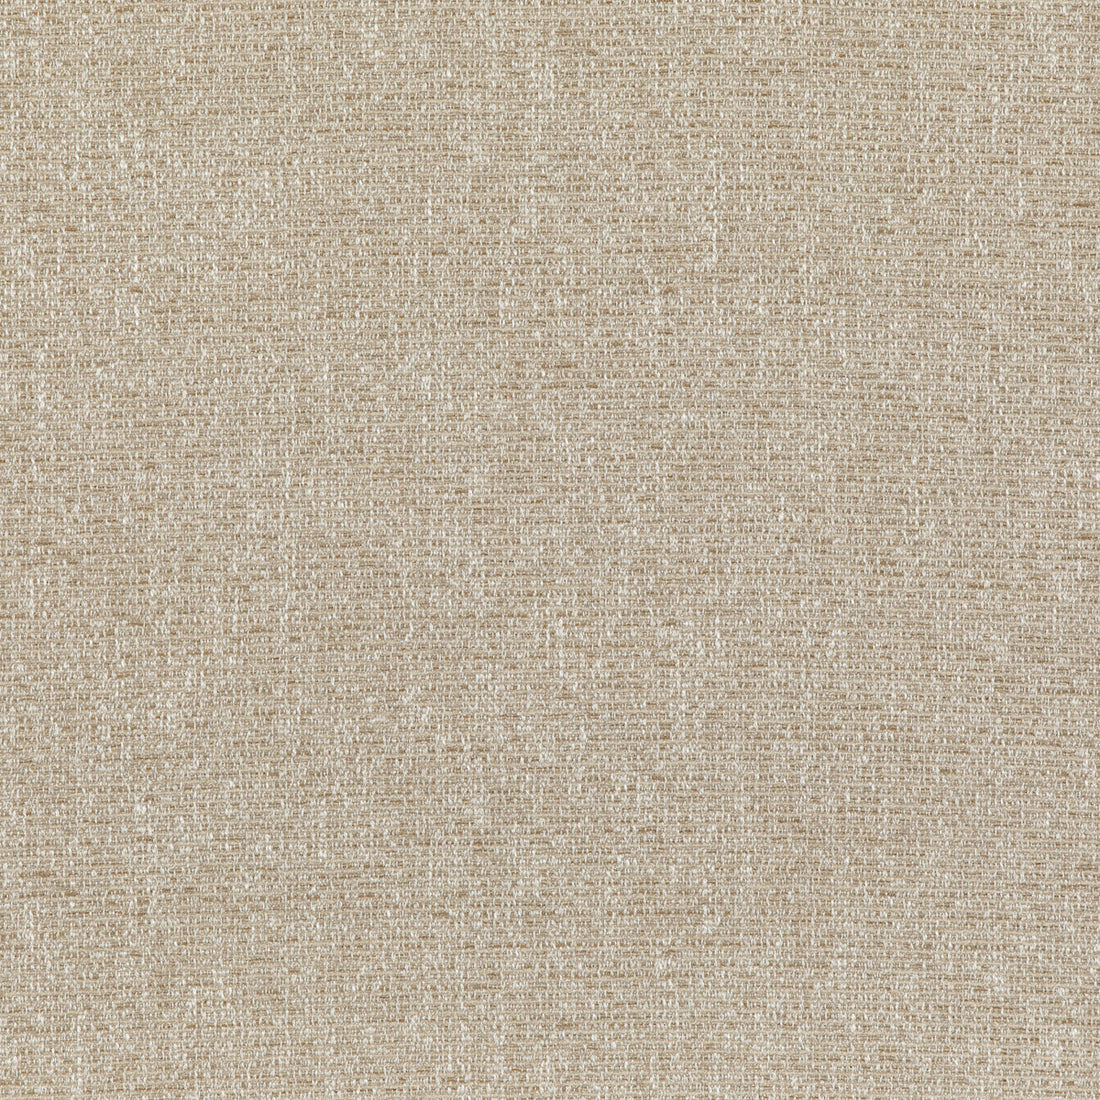 Crossover fabric in sisal color - pattern ED85322.190.0 - by Threads in the Luxury Weaves II collection